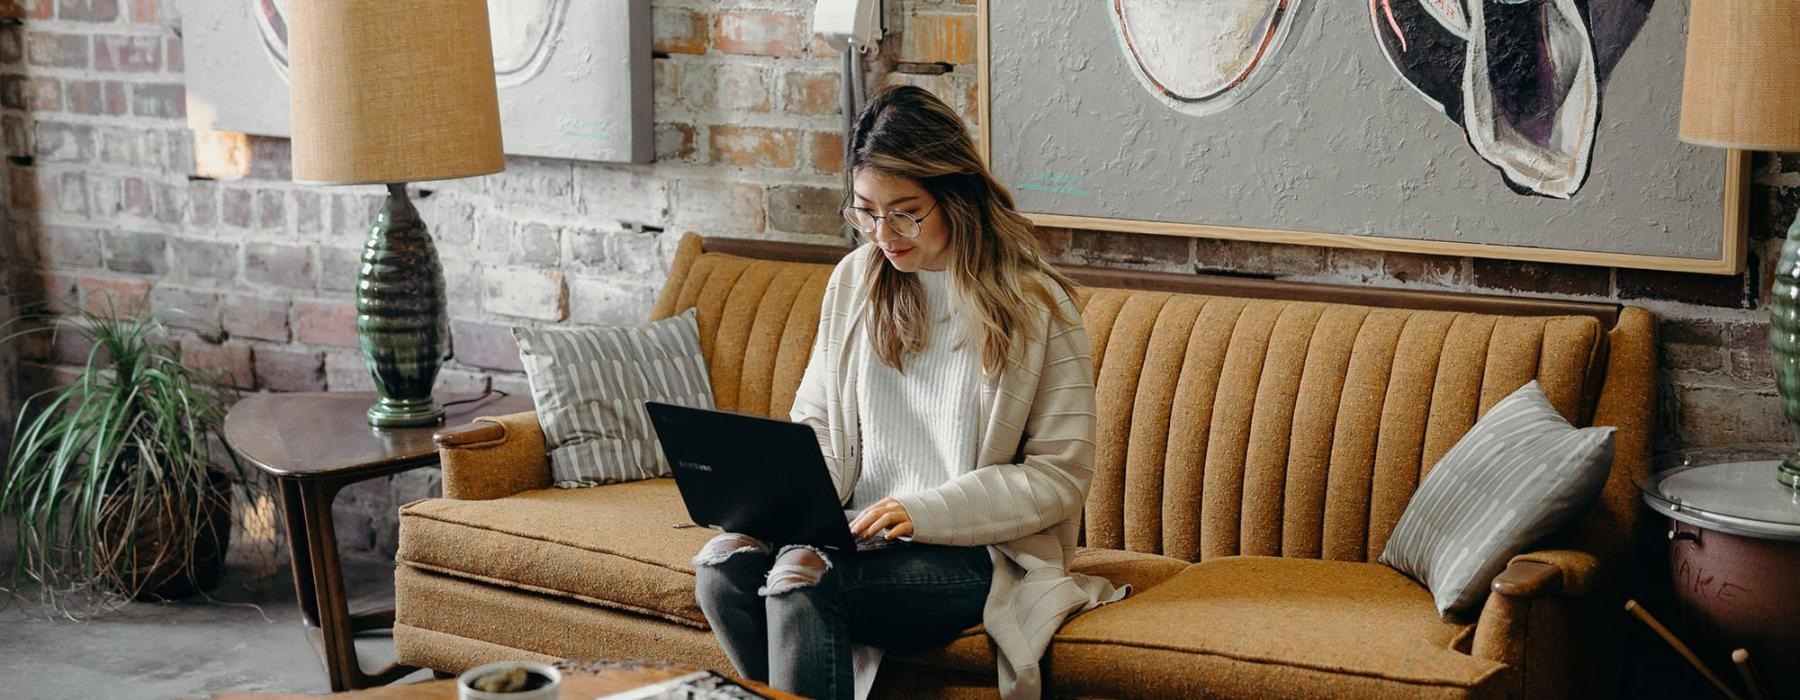 a woman sitting on a couch working on a laptop